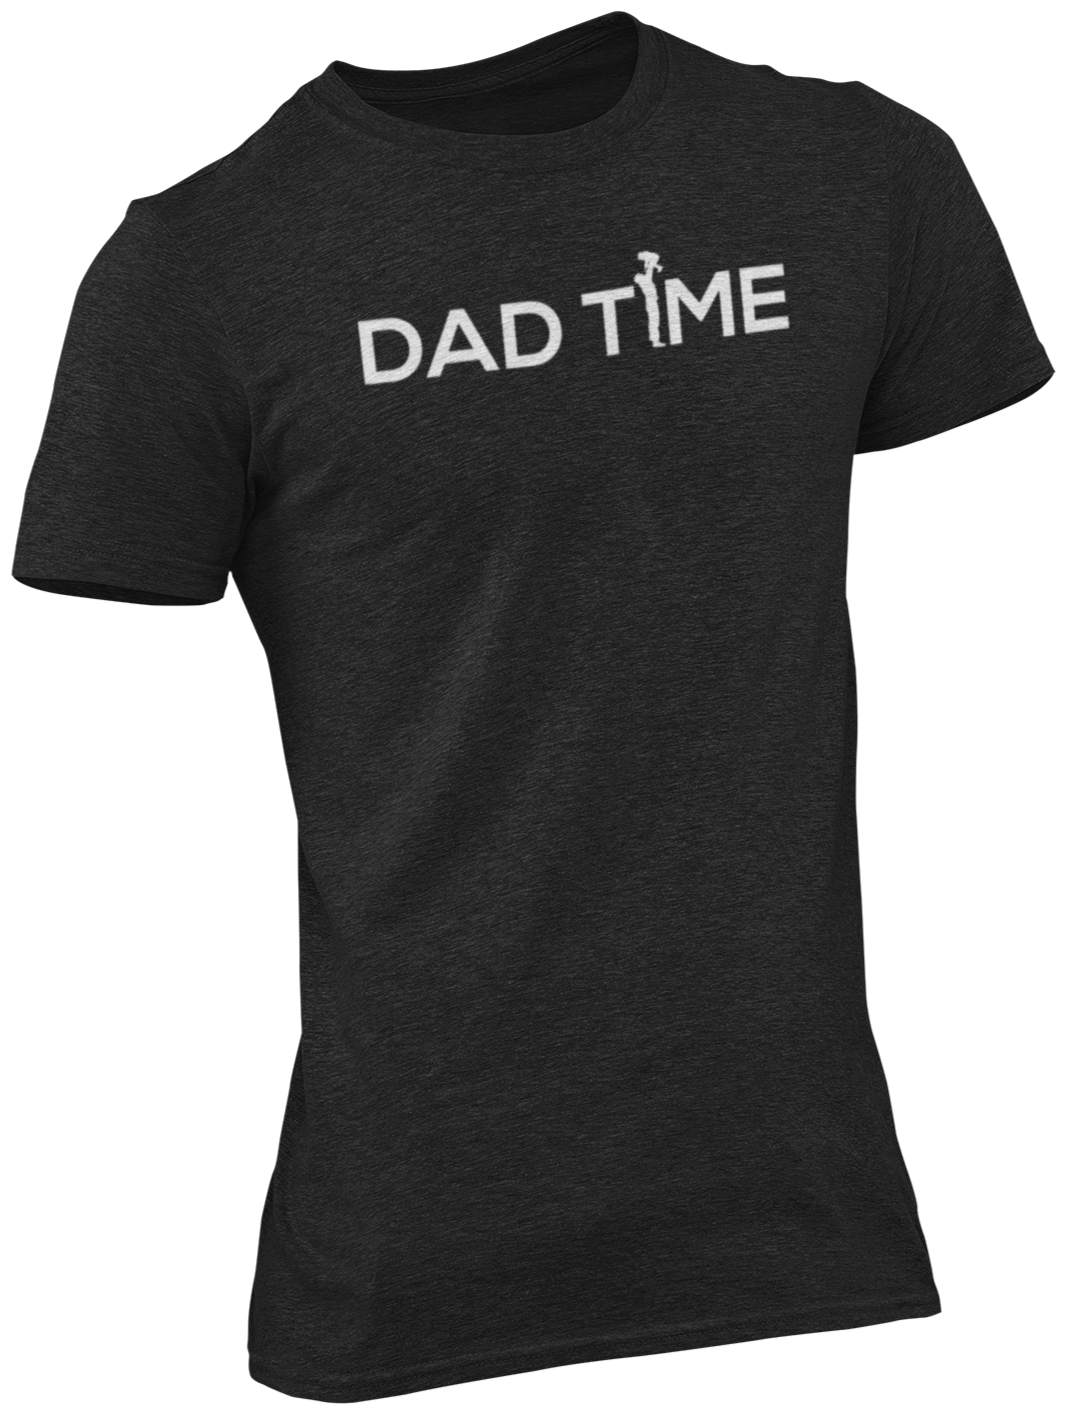 Dad Time Tee - DT140